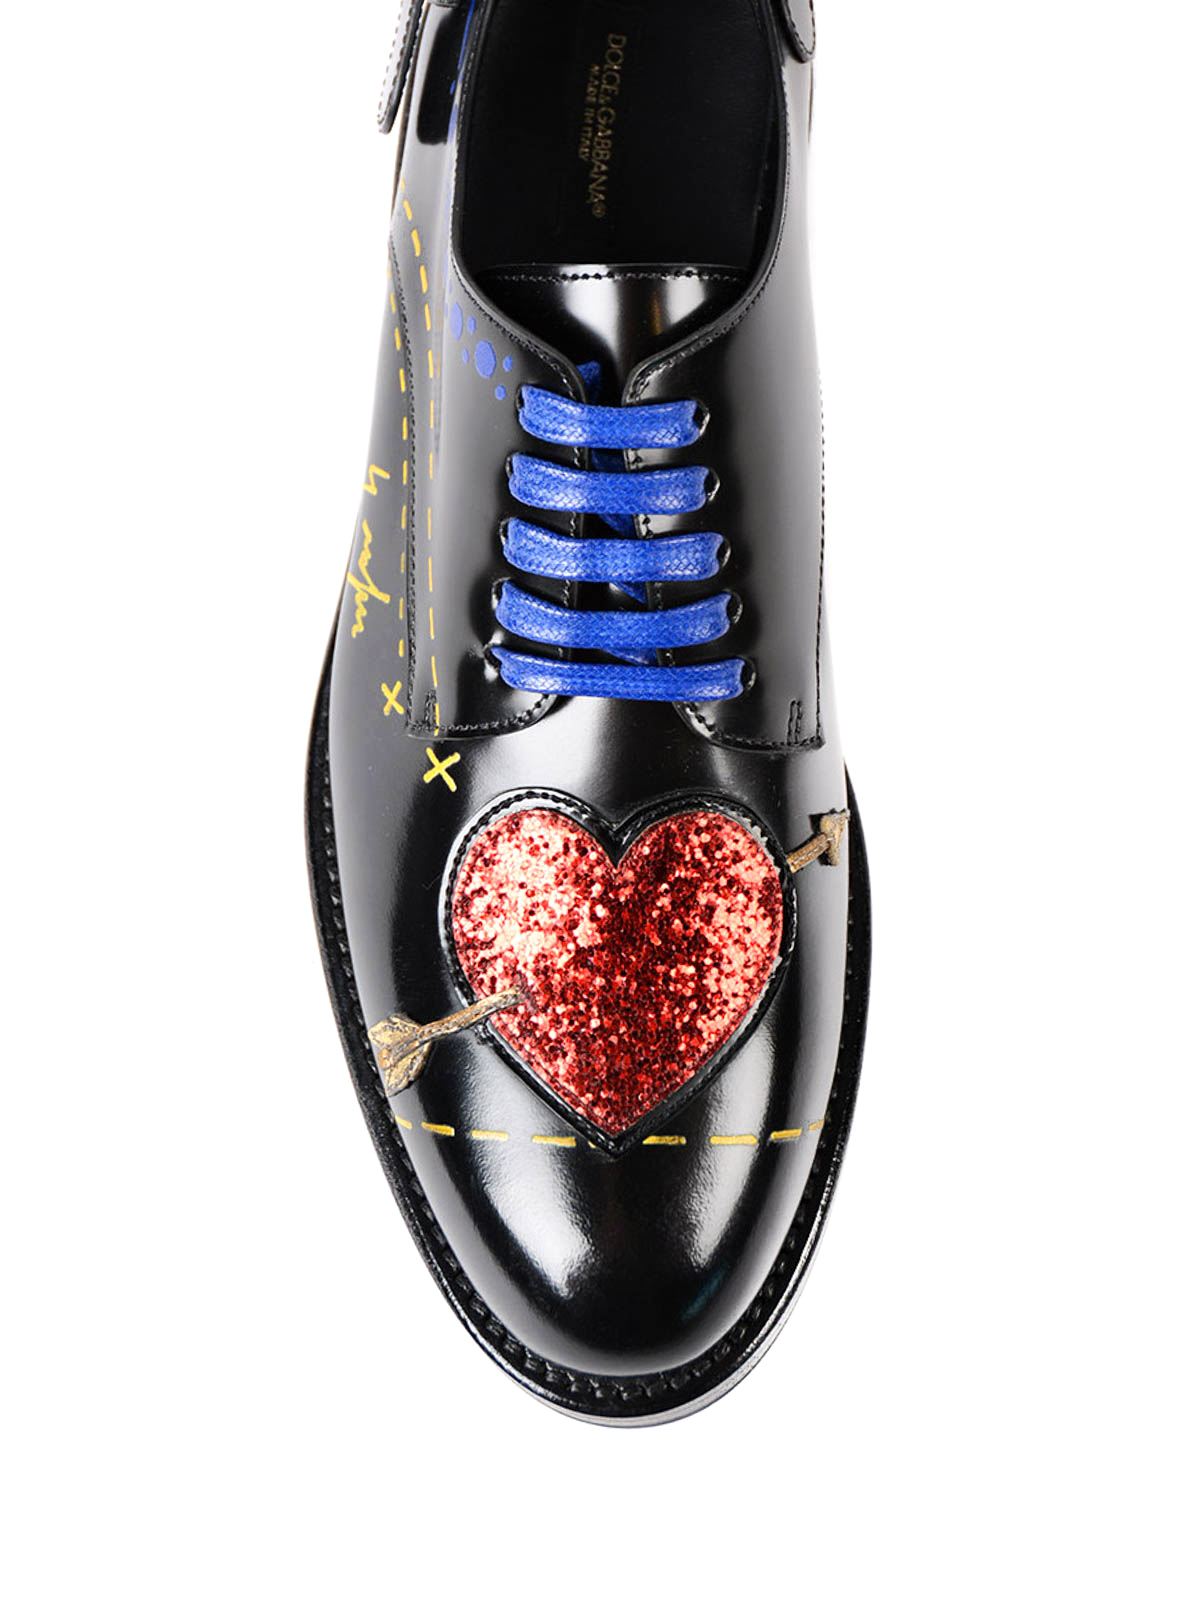 dolce and gabbana derby shoes